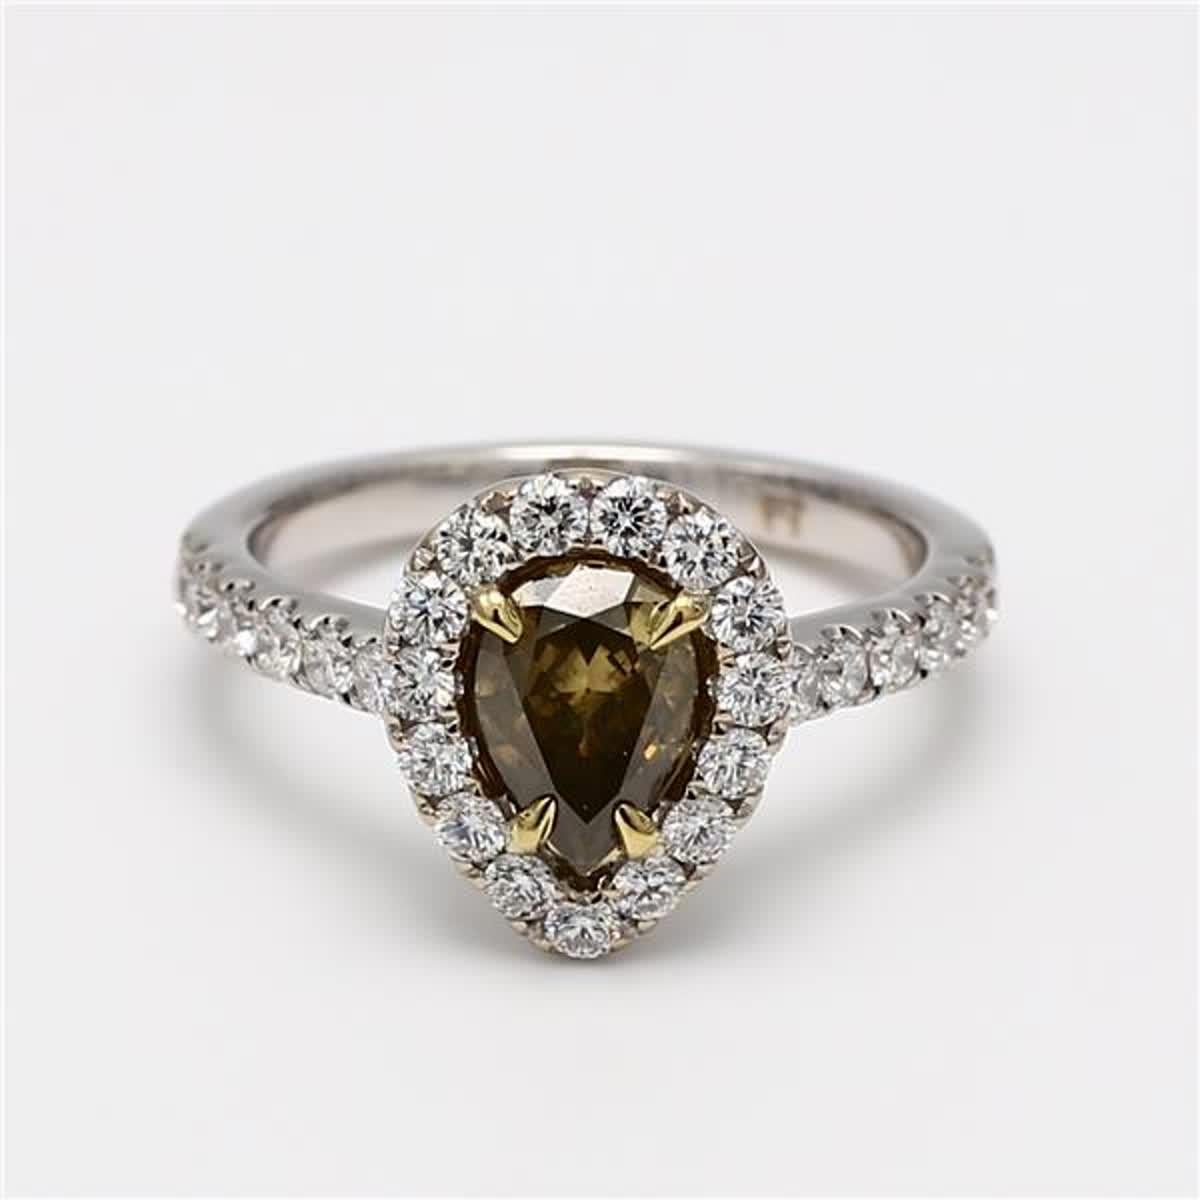 RareGemWorld's classic GIA certified diamond ring. Mounted in a beautiful 18K Yellow and White Gold setting with a natural pear cut brown diamond. The brown diamond is surrounded by small round natural white diamond melee. This ring is guaranteed to